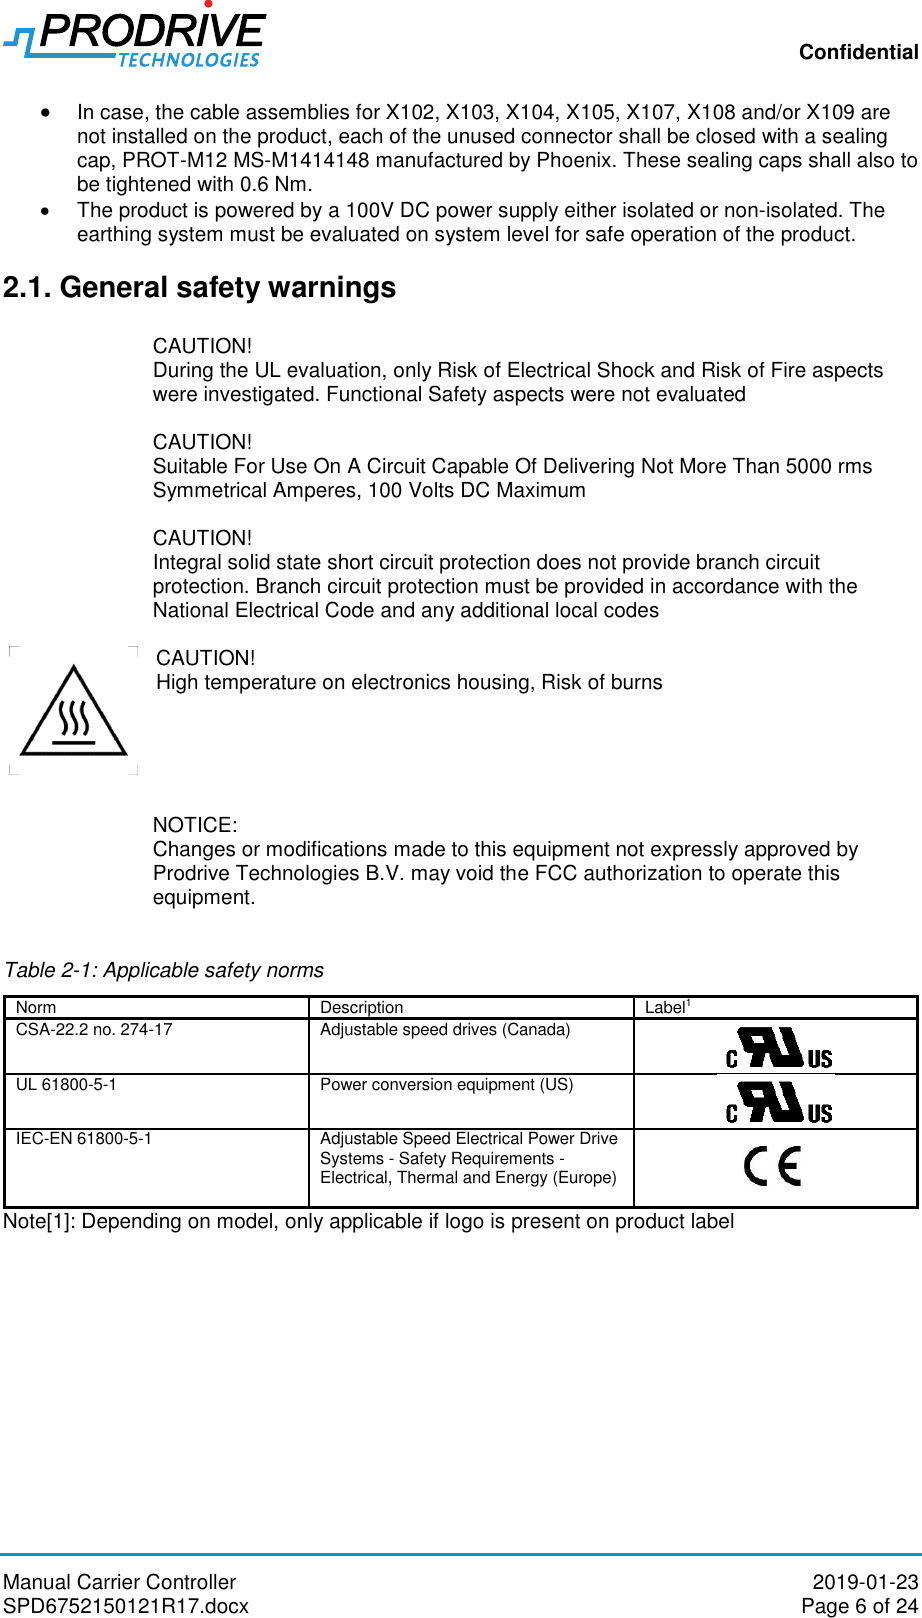 Confidential Manual Carrier Controller  2019-01-23 SPD6752150121R17.docx  Page 6 of 24  In case, the cable assemblies for X102, X103, X104, X105, X107, X108 and/or X109 are not installed on the product, each of the unused connector shall be closed with a sealing cap, PROT-M12 MS-M1414148 manufactured by Phoenix. These sealing caps shall also to be tightened with 0.6 Nm.   The product is powered by a 100V DC power supply either isolated or non-isolated. The earthing system must be evaluated on system level for safe operation of the product.  2.1. General safety warnings  CAUTION! During the UL evaluation, only Risk of Electrical Shock and Risk of Fire aspects were investigated. Functional Safety aspects were not evaluated  CAUTION! Suitable For Use On A Circuit Capable Of Delivering Not More Than 5000 rms Symmetrical Amperes, 100 Volts DC Maximum  CAUTION! Integral solid state short circuit protection does not provide branch circuit protection. Branch circuit protection must be provided in accordance with the National Electrical Code and any additional local codes     CAUTION! High temperature on electronics housing, Risk of burns      NOTICE: Changes or modifications made to this equipment not expressly approved by Prodrive Technologies B.V. may void the FCC authorization to operate this equipment.  Table 2-1: Applicable safety norms Norm Description Label1 CSA-22.2 no. 274-17 Adjustable speed drives (Canada)  UL 61800-5-1 Power conversion equipment (US)   IEC-EN 61800-5-1 Adjustable Speed Electrical Power Drive Systems - Safety Requirements - Electrical, Thermal and Energy (Europe)   Note[1]: Depending on model, only applicable if logo is present on product label 